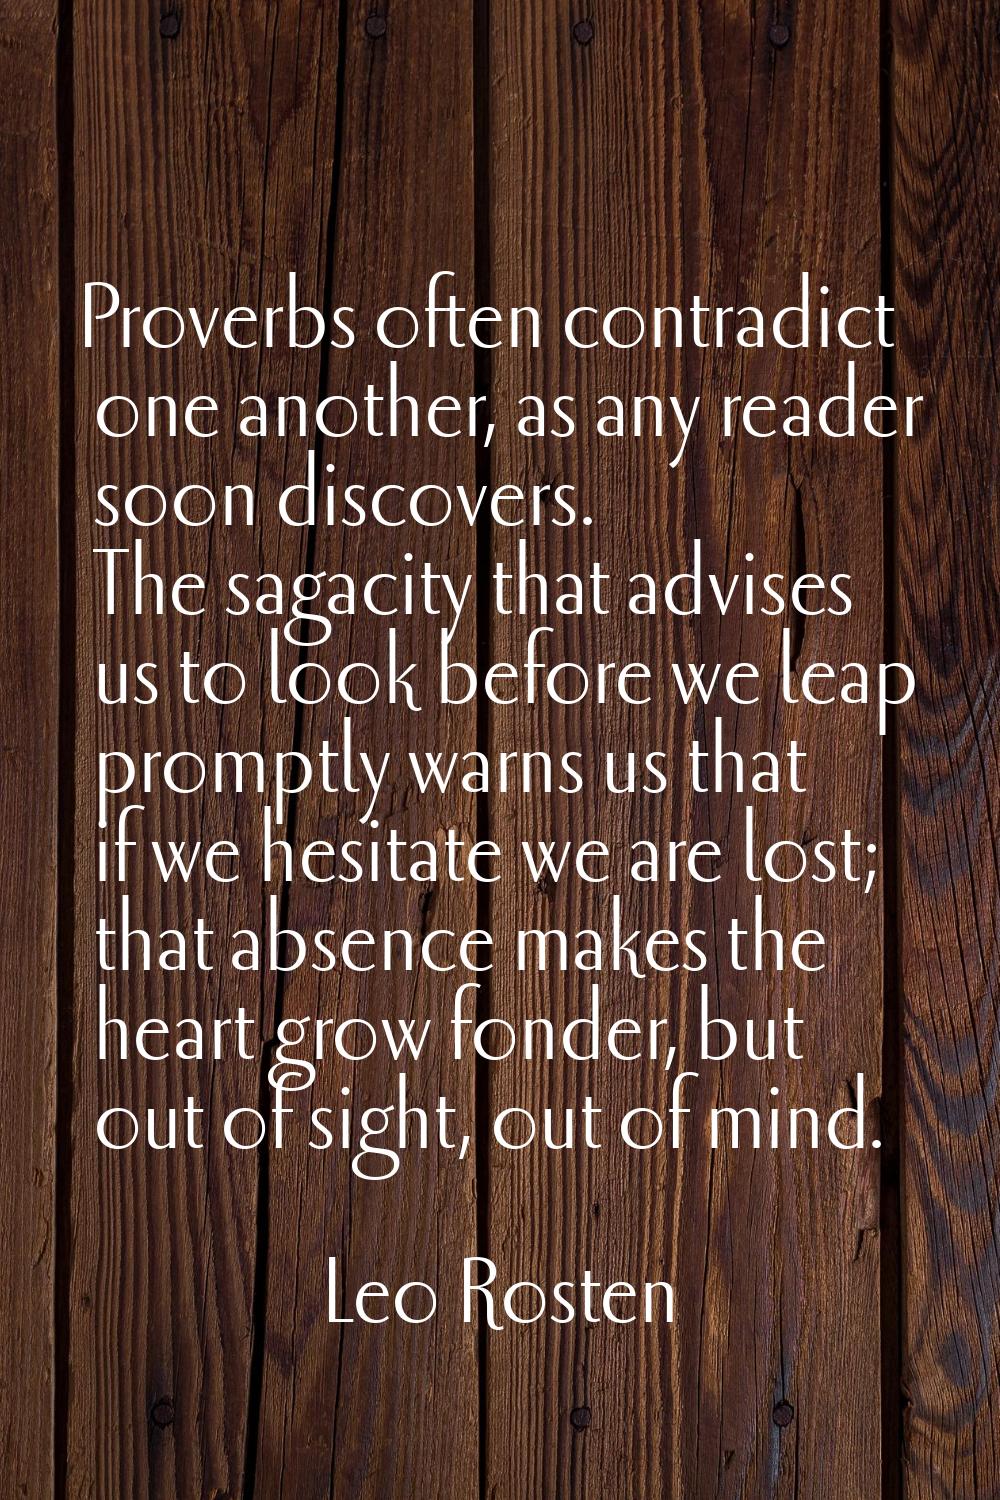 Proverbs often contradict one another, as any reader soon discovers. The sagacity that advises us t